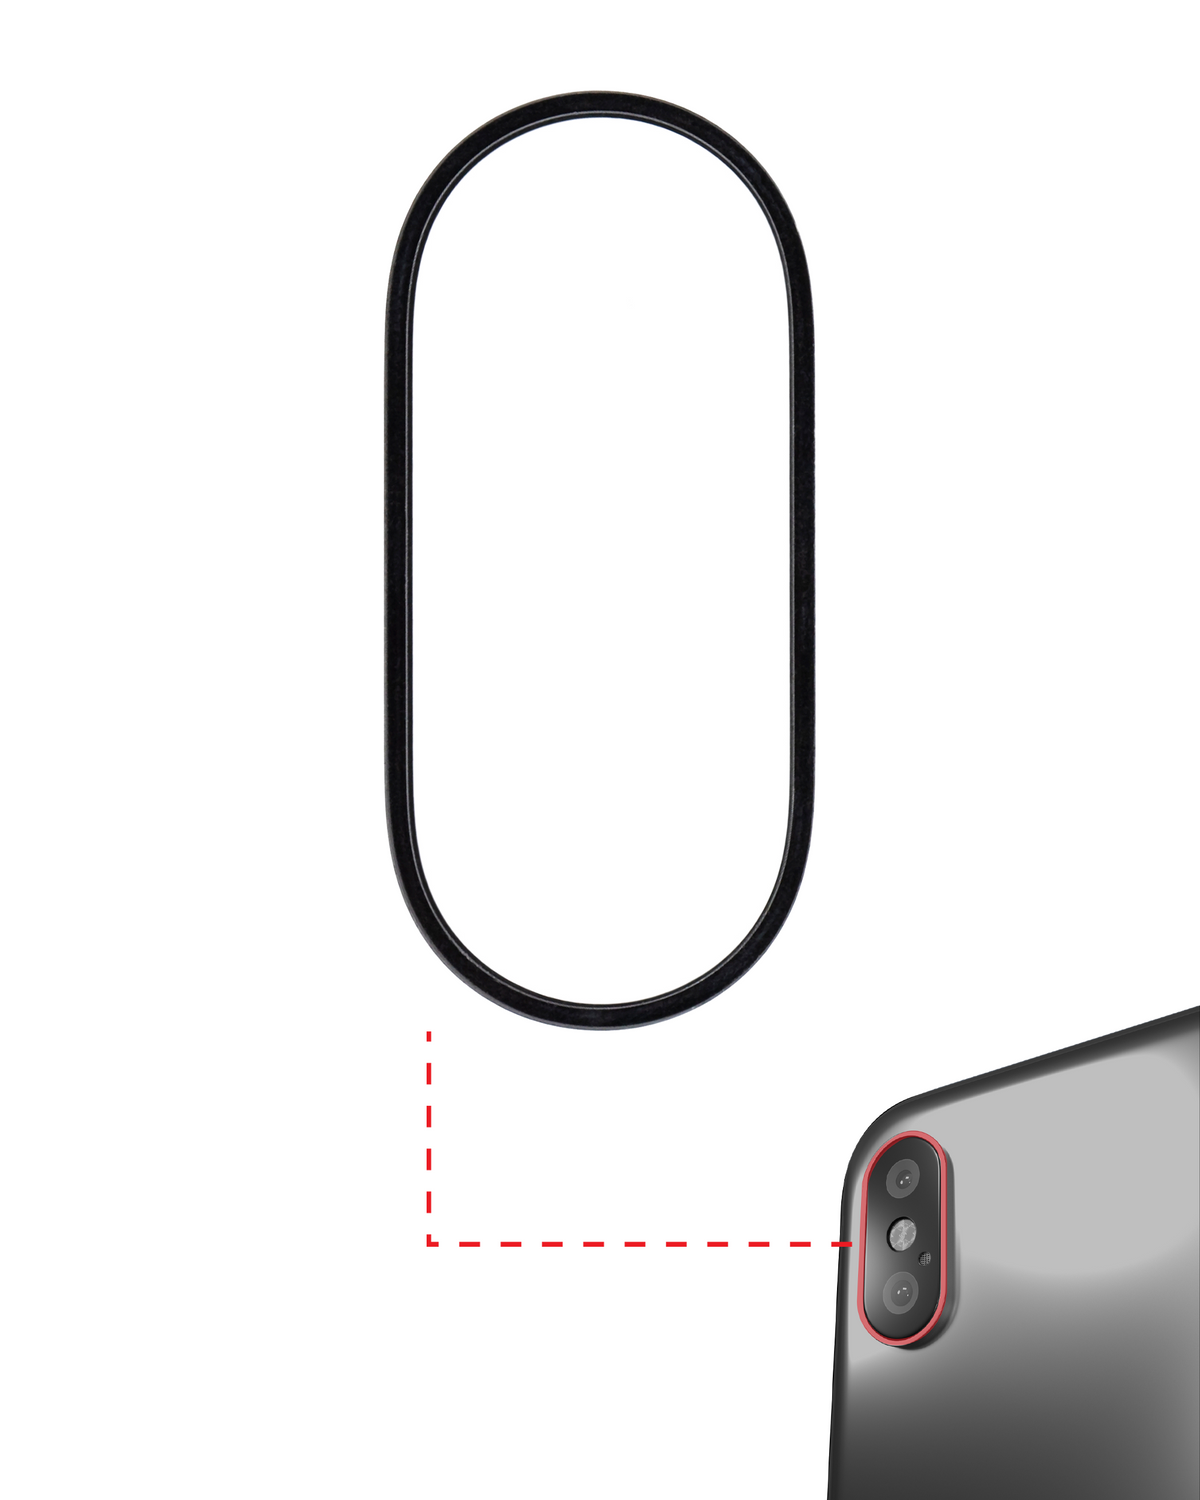 SPACE GRAY BACK CAMERA BEZEL RING ONLY (10 PACK) COMPATIBLE WITH IPHONE X